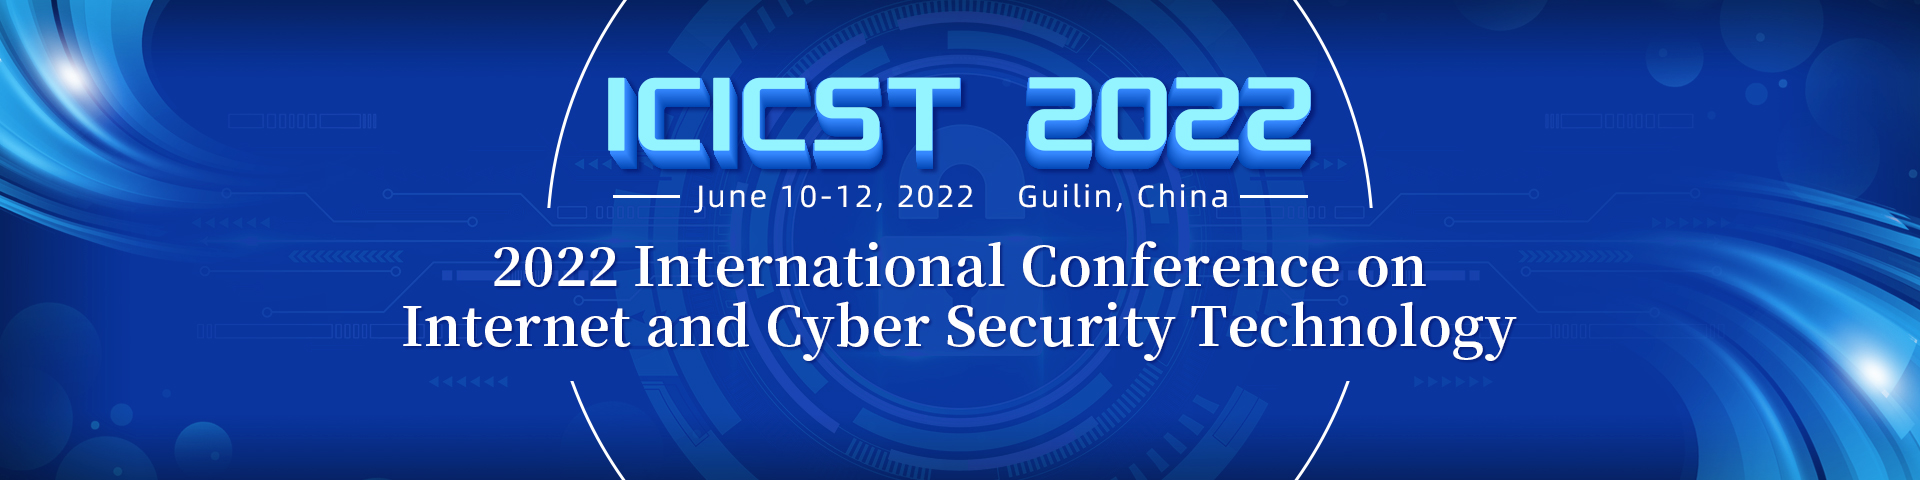 2022 International Conference on Internet and Cyber Security Technology (ICICST 2022), Guilin, Guangxi, China